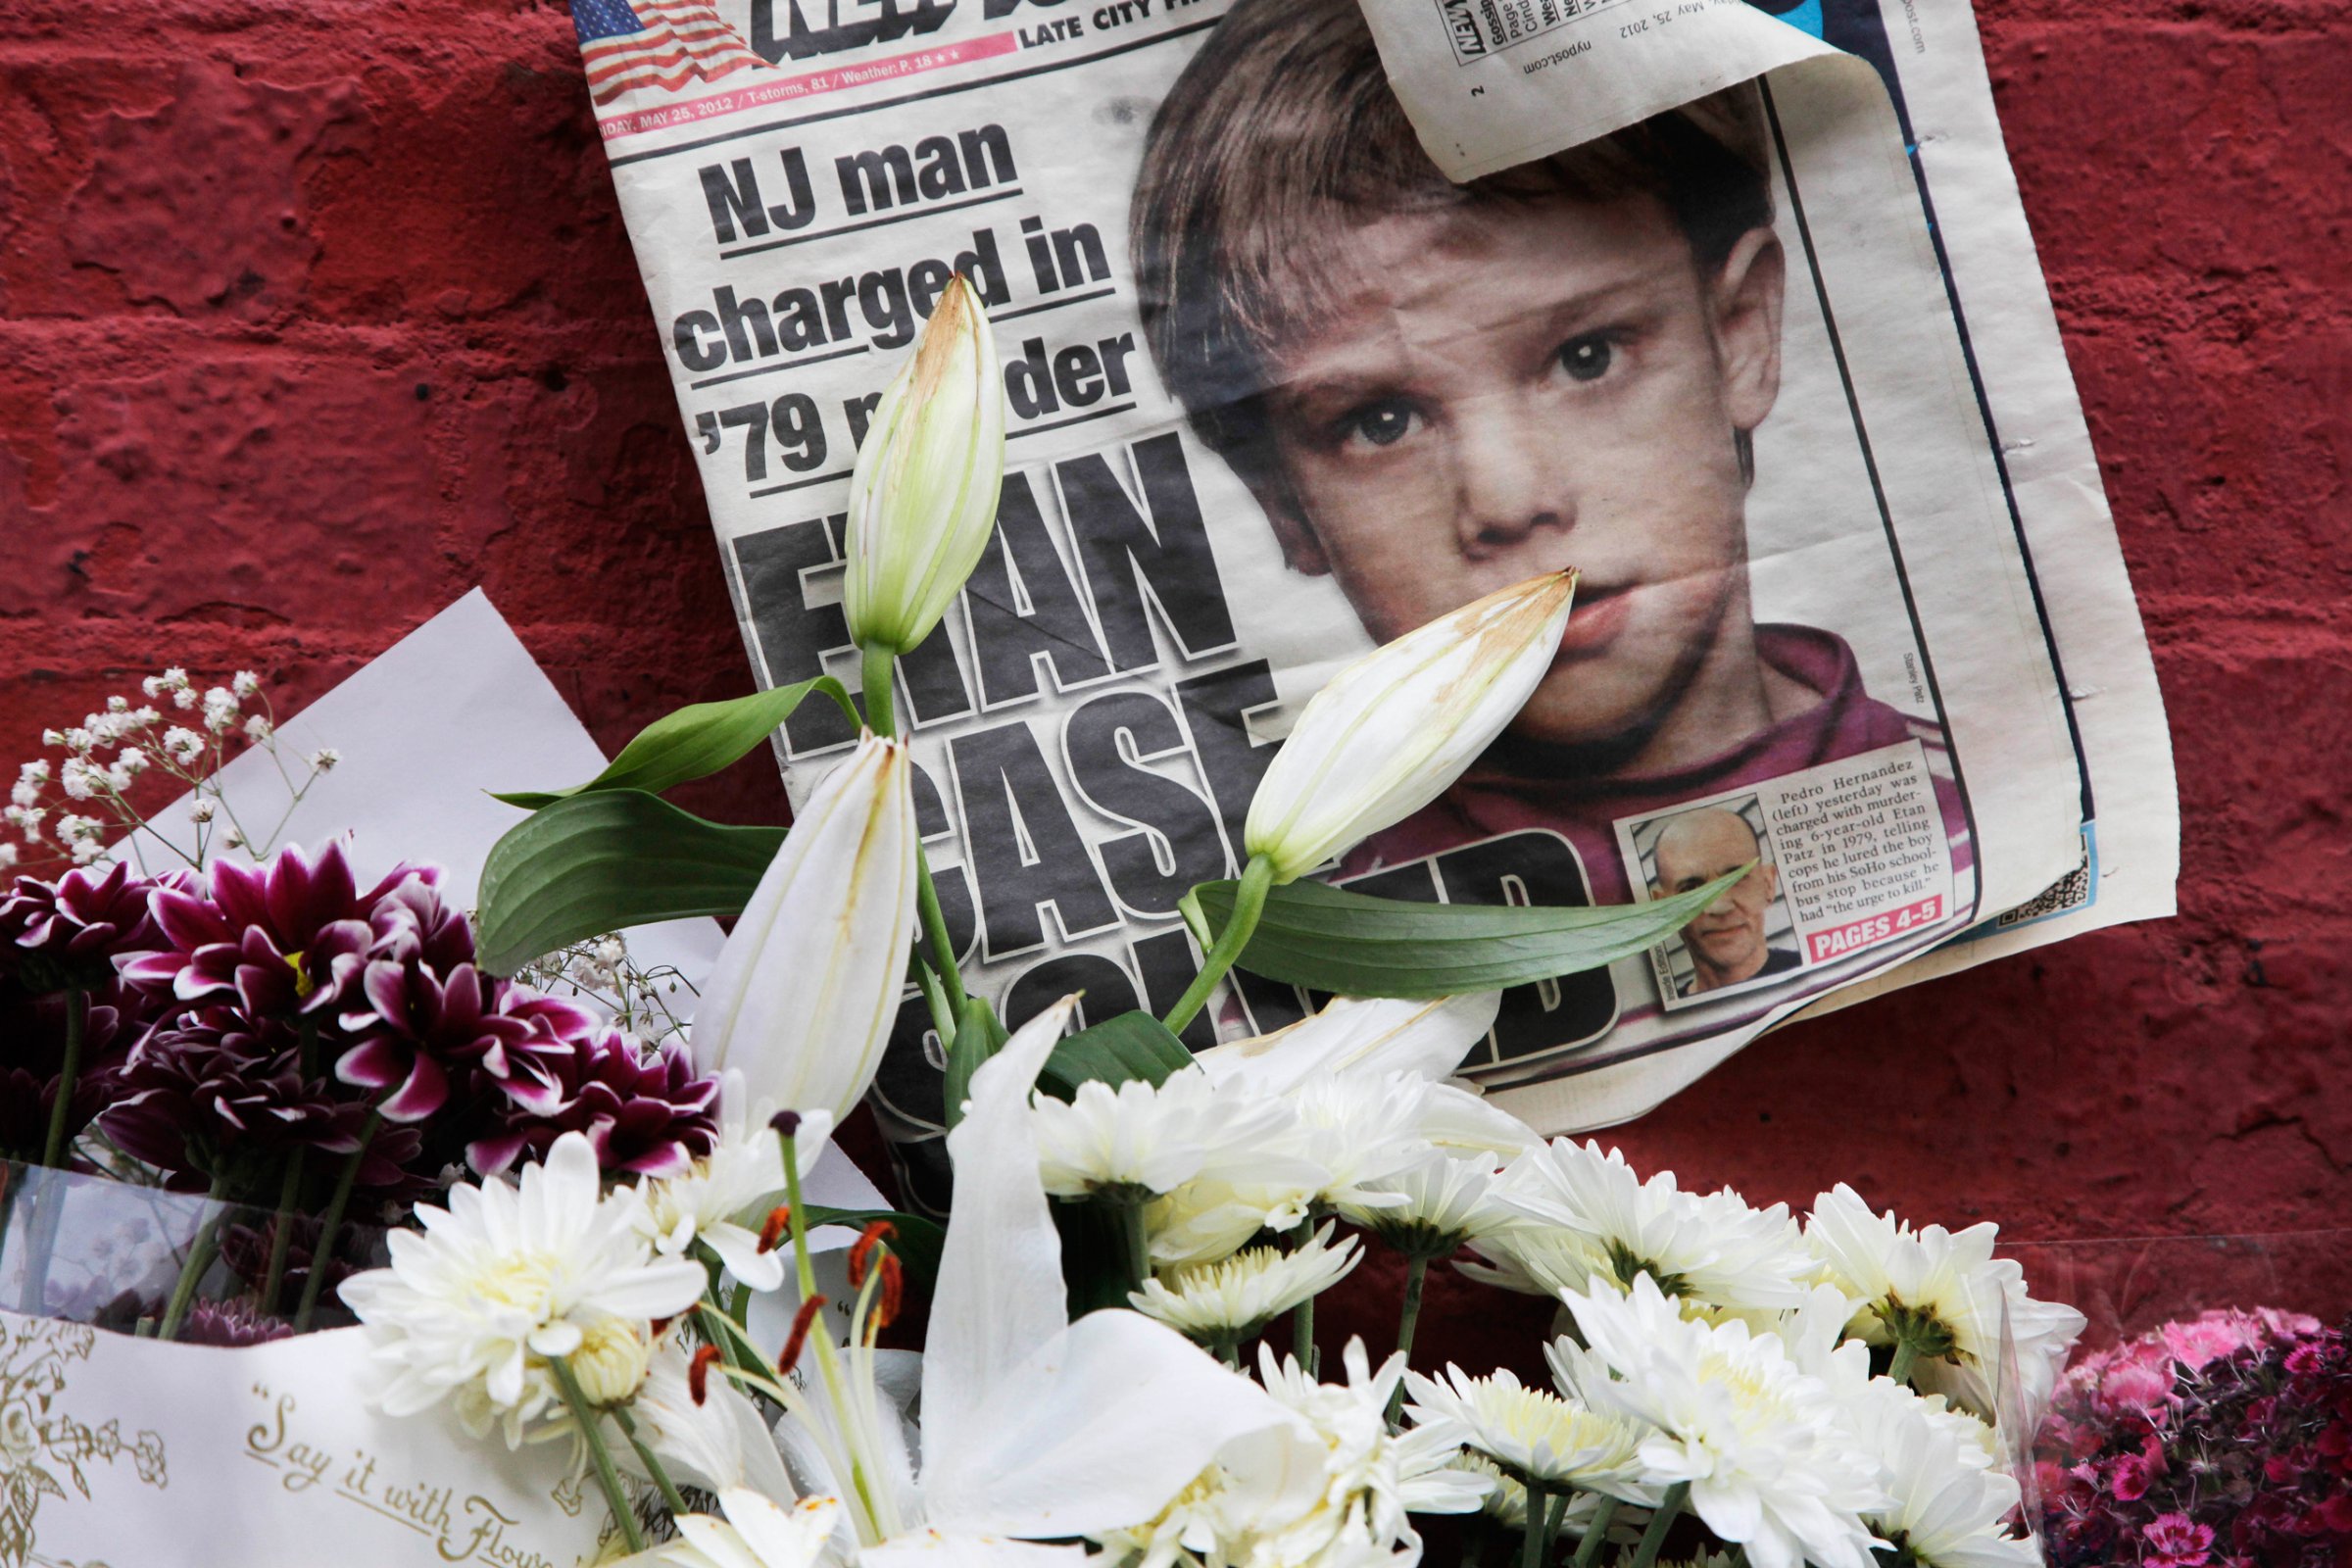 A newspaper with a photograph of Etan Patz is part of a makeshift memorial in the SoHo neighborhood of New York, Monday, May 28, 2012. For prosecutors, the work is just beginning after the astonishing arrest last week of a man who police say confessed to strangling the 6-year-old New York City boy 33 years ago in one of the nation's most bewildering missing children's cases. Pedro Hernandez, 51, was charged with second-degree murder in the 1979 death of Etan Patz, based largely on a signed confession he gave to detectives. (AP Photo/Mark Lennihan)